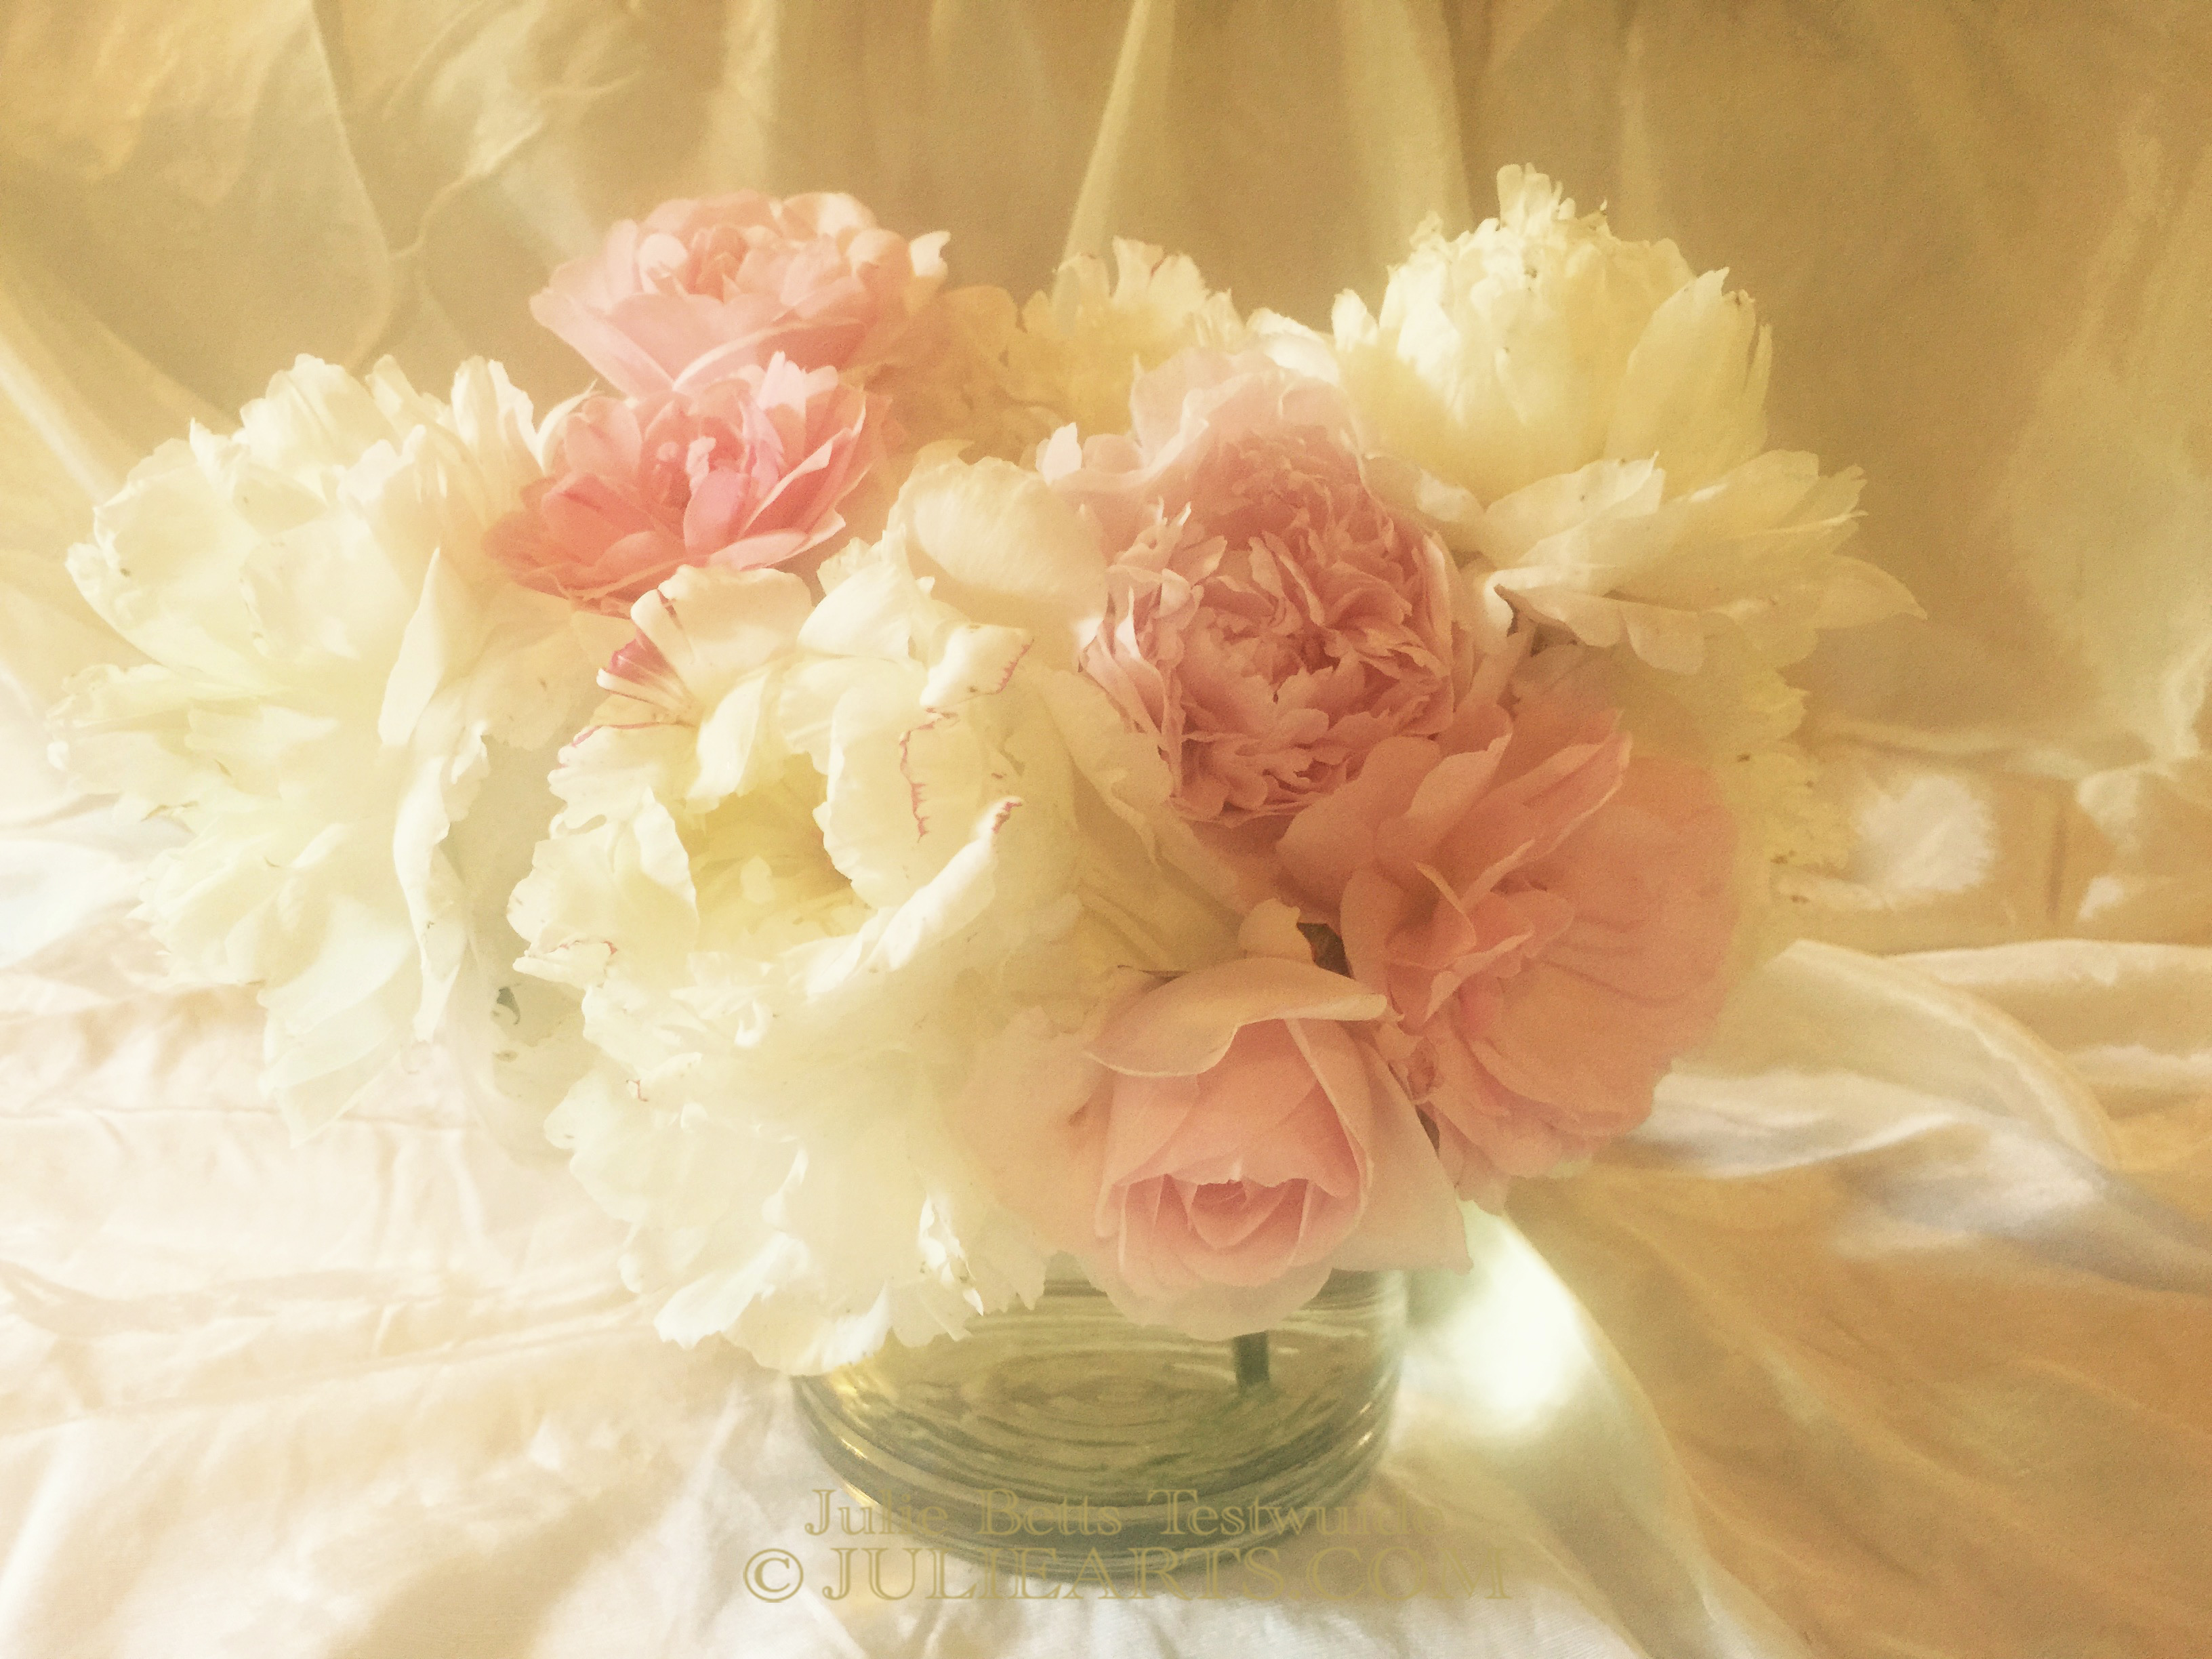 Roses and Peonies